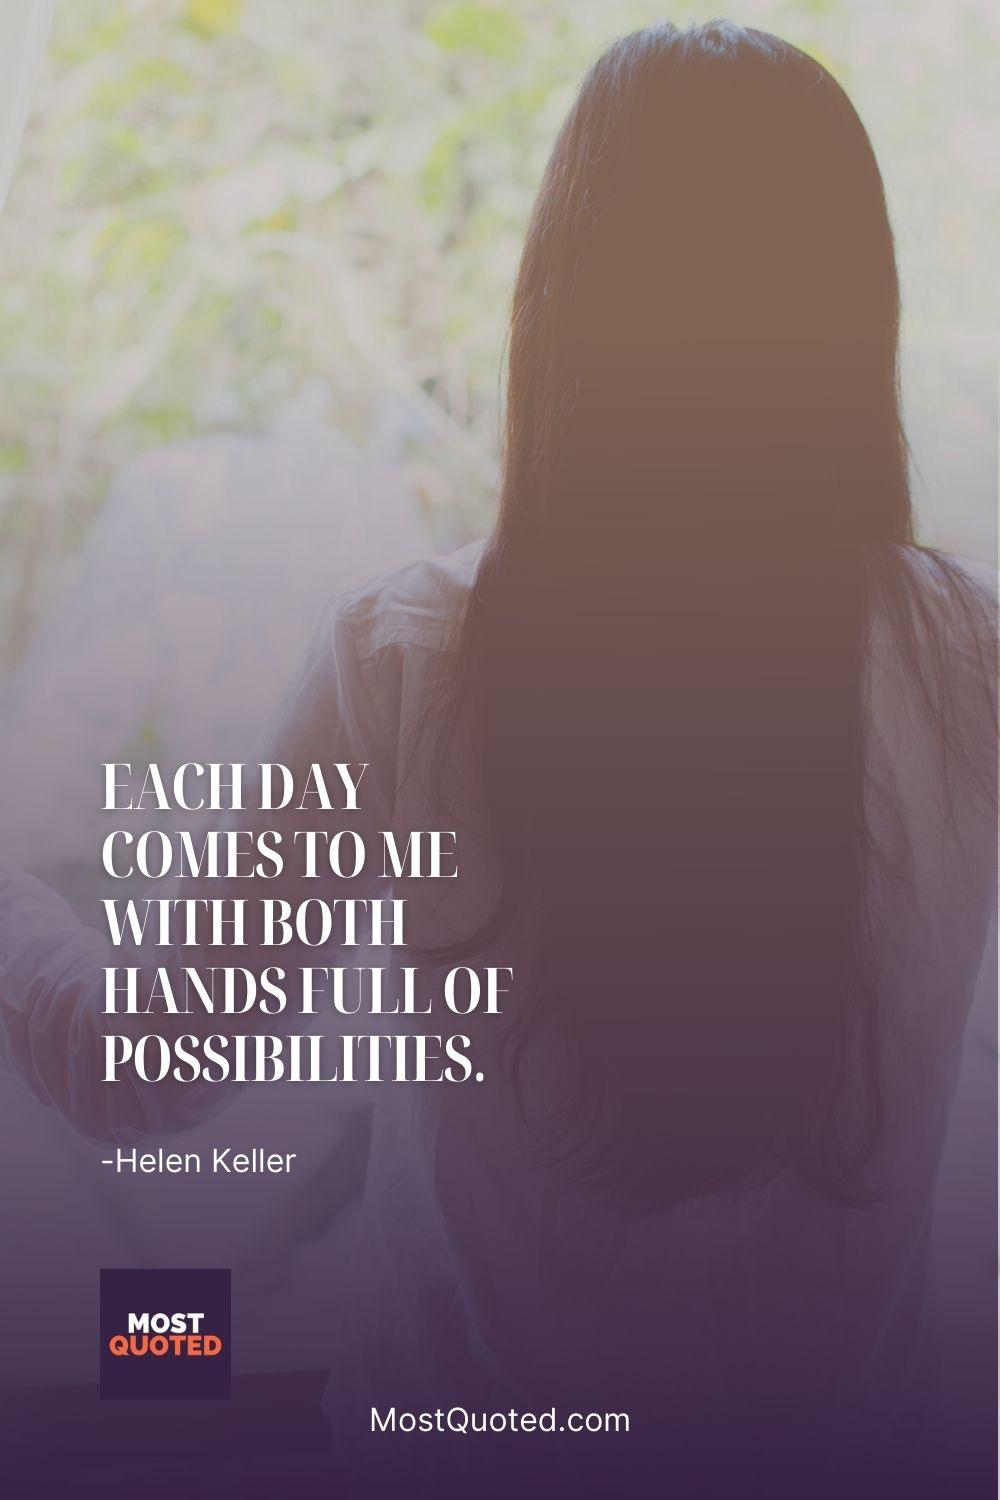 Each day comes to me with both hands full of possibilities. - Helen Keller